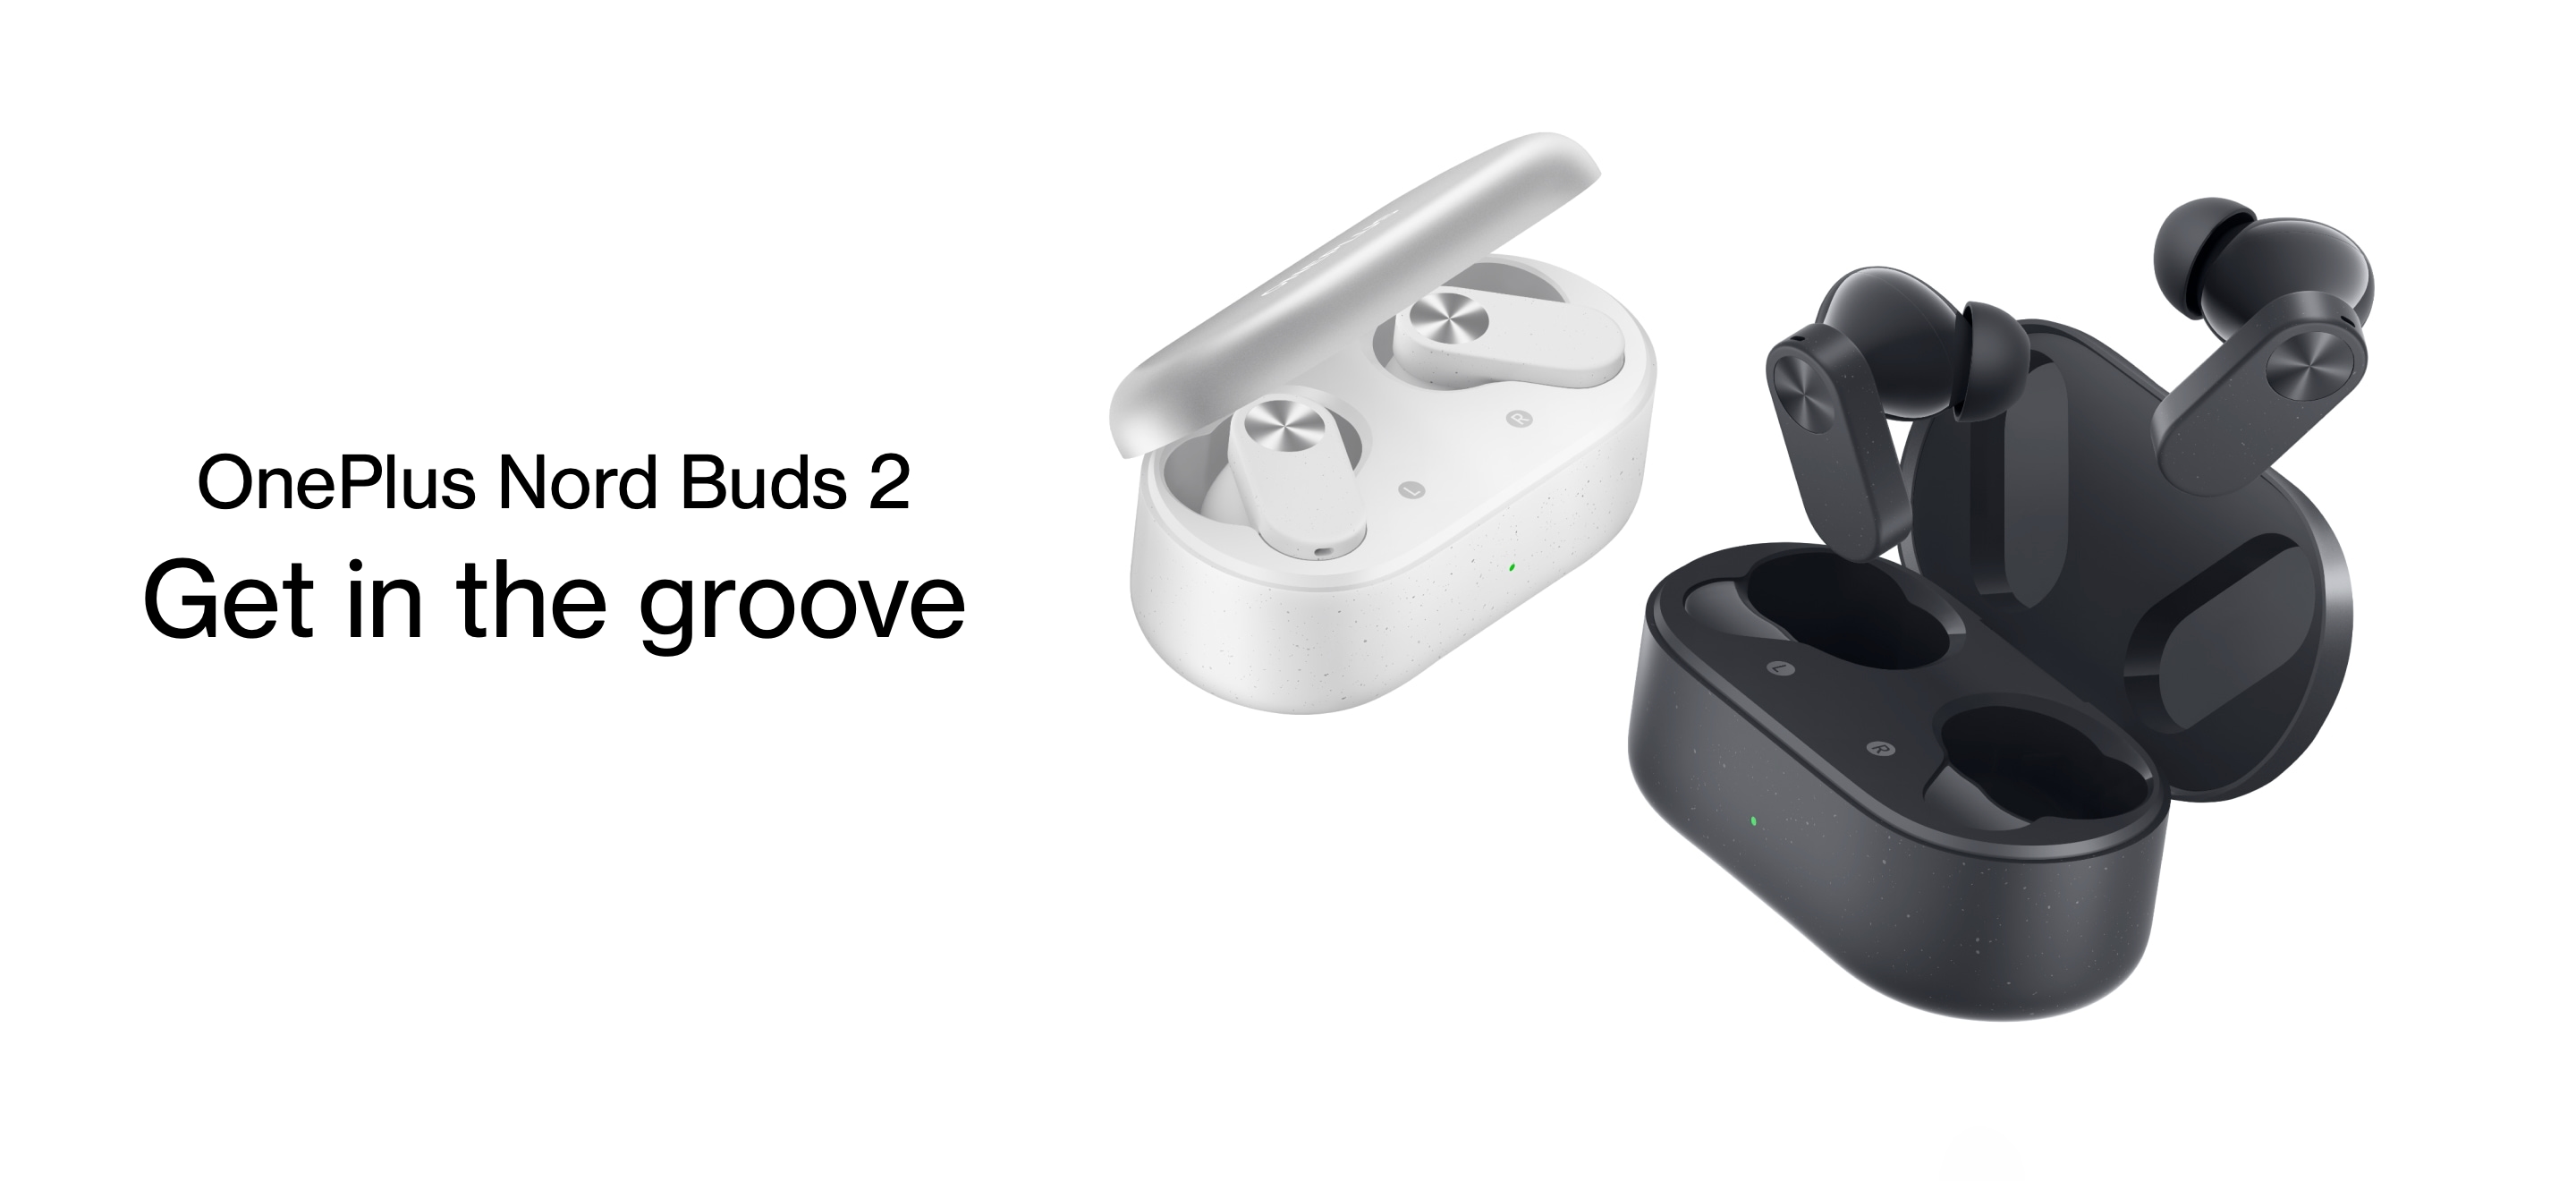 OnePlus Nord Buds 2: TWS earbuds with ANC, IP55 protection and up to 36 hours of battery life for €70